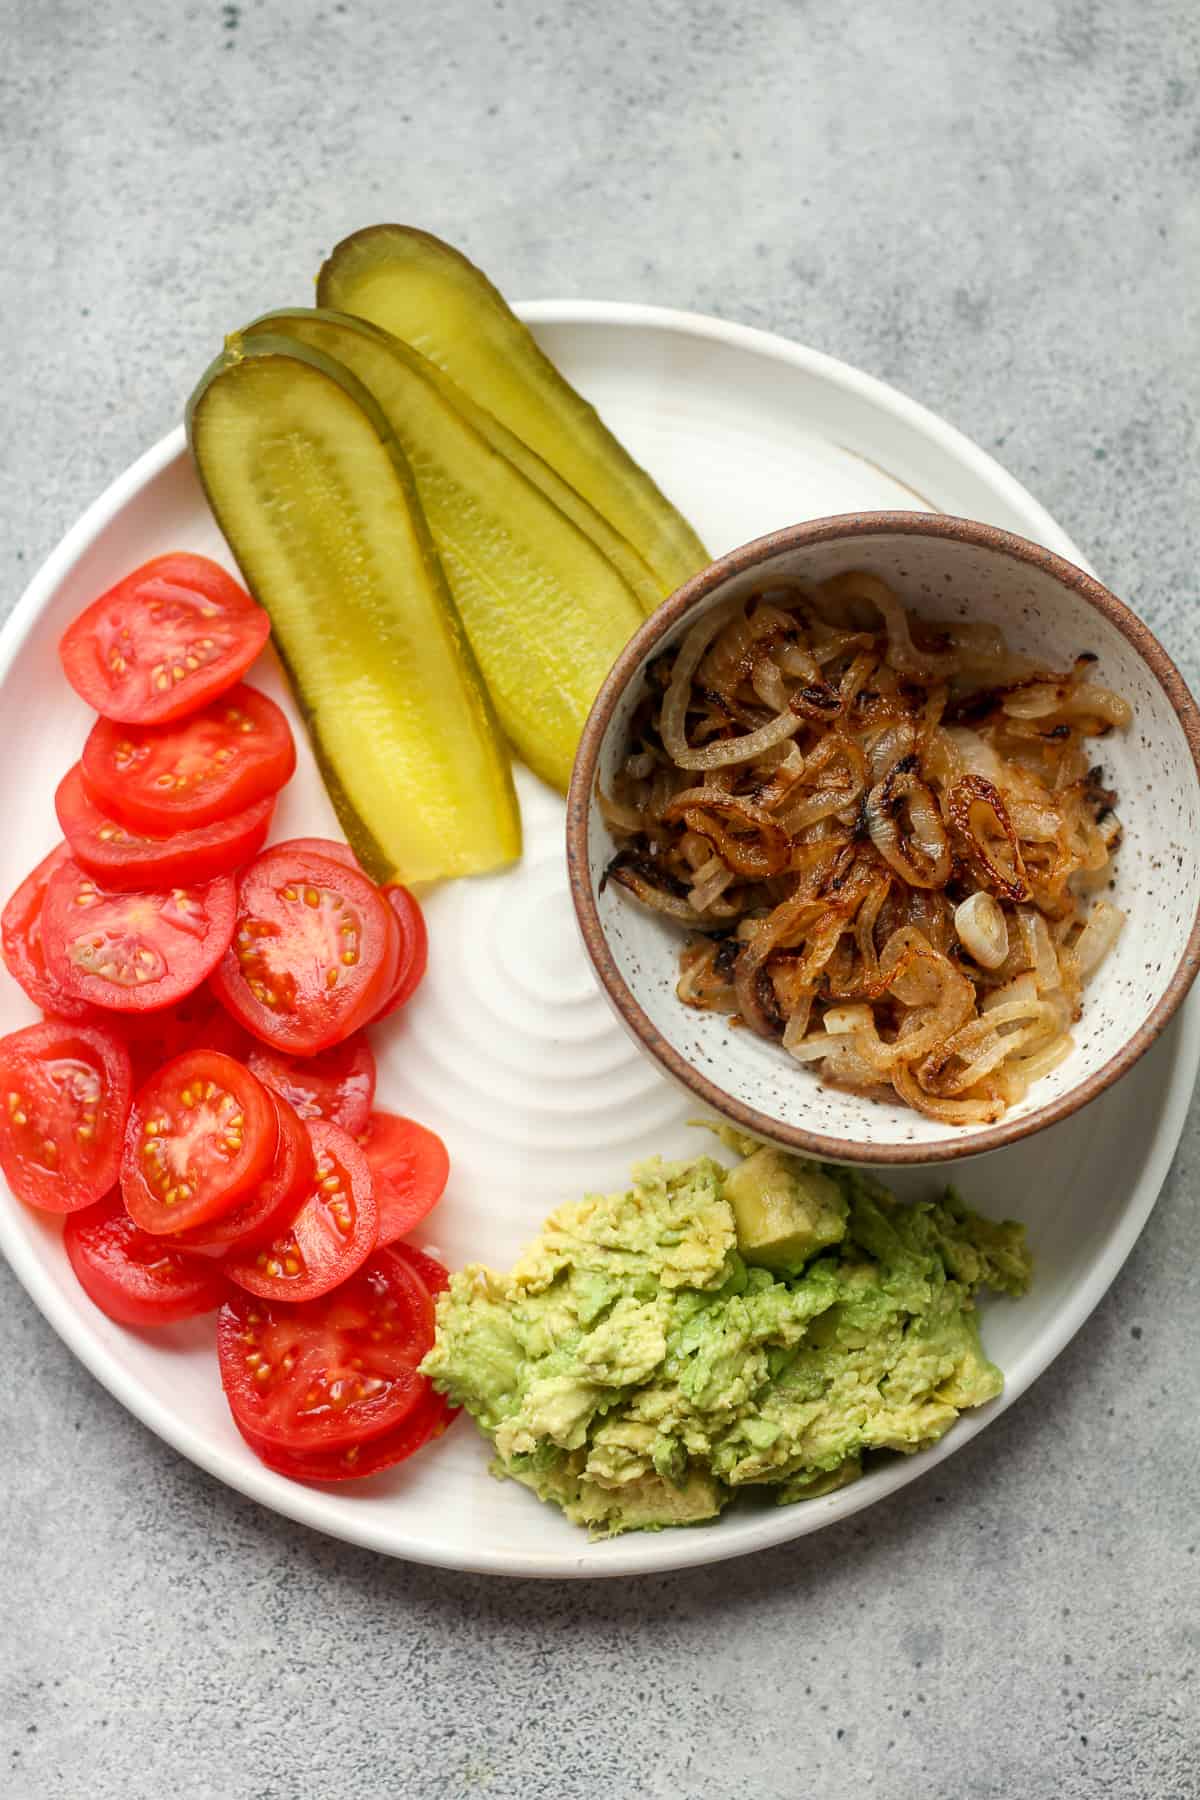 A plate of the toppings - onions, pickles, tomatoes, and avocado.